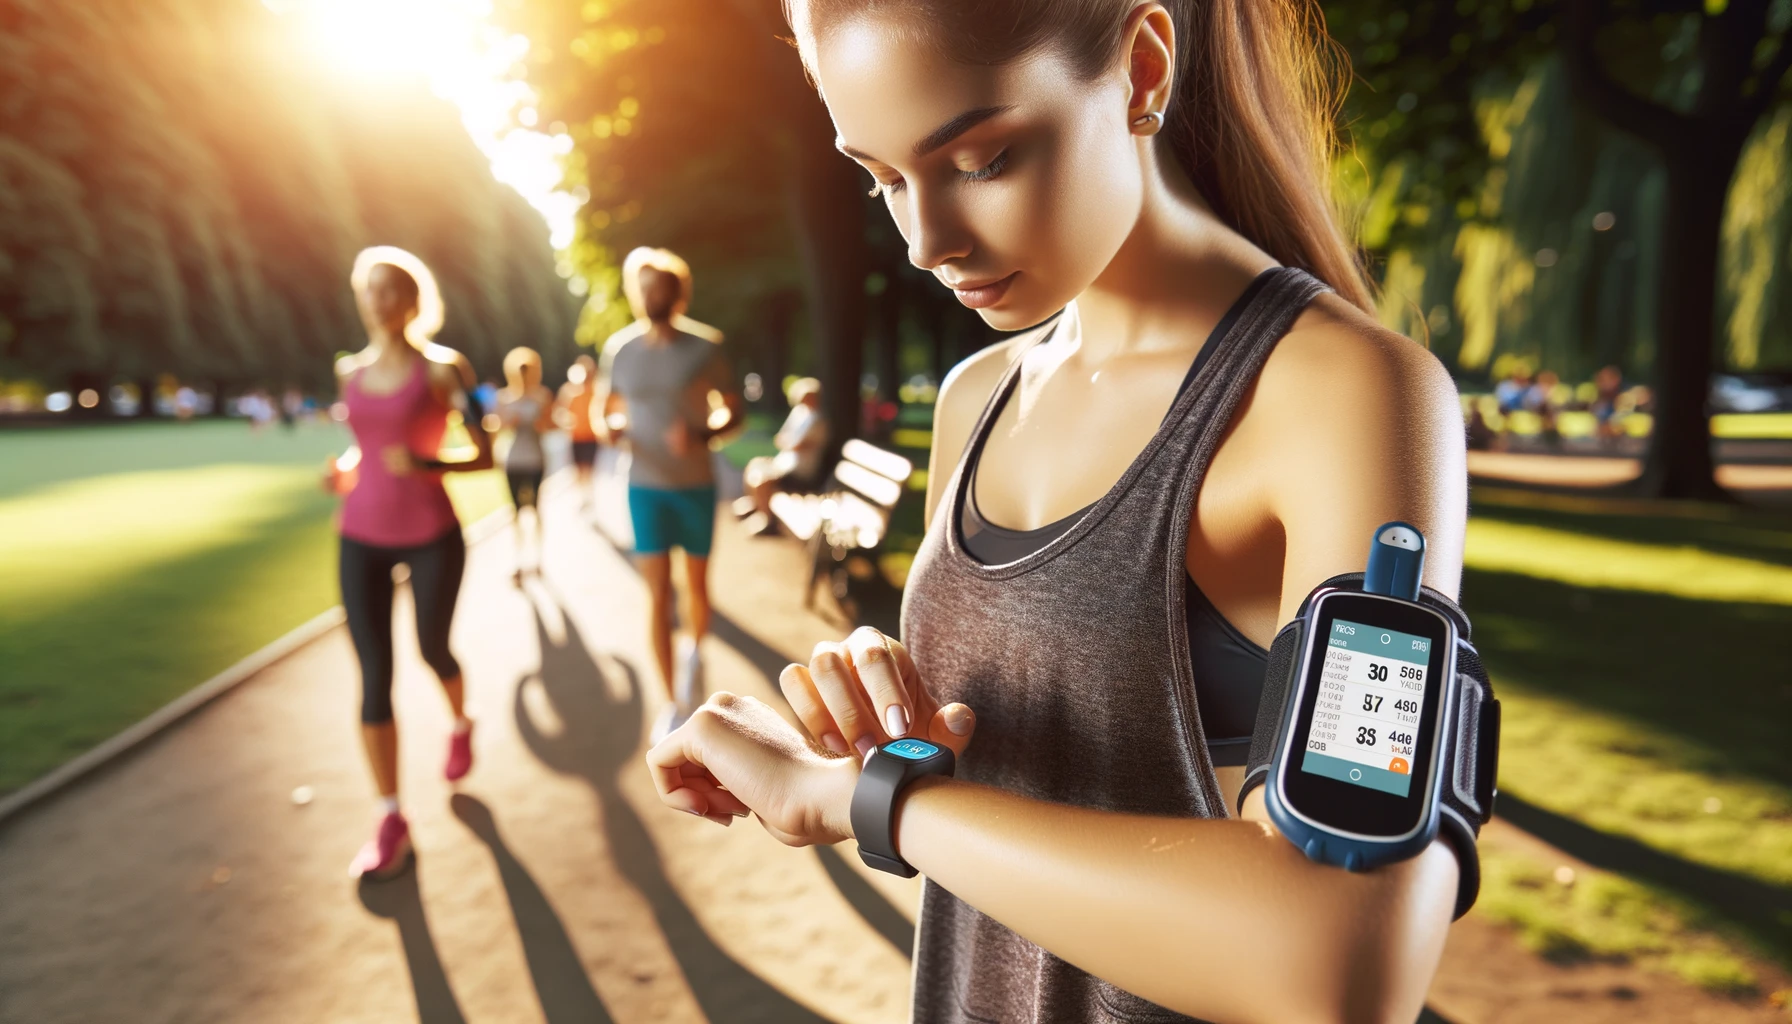 Athlete in a park with CGM and fitness tracker; Illustration of CGM and health symbols.